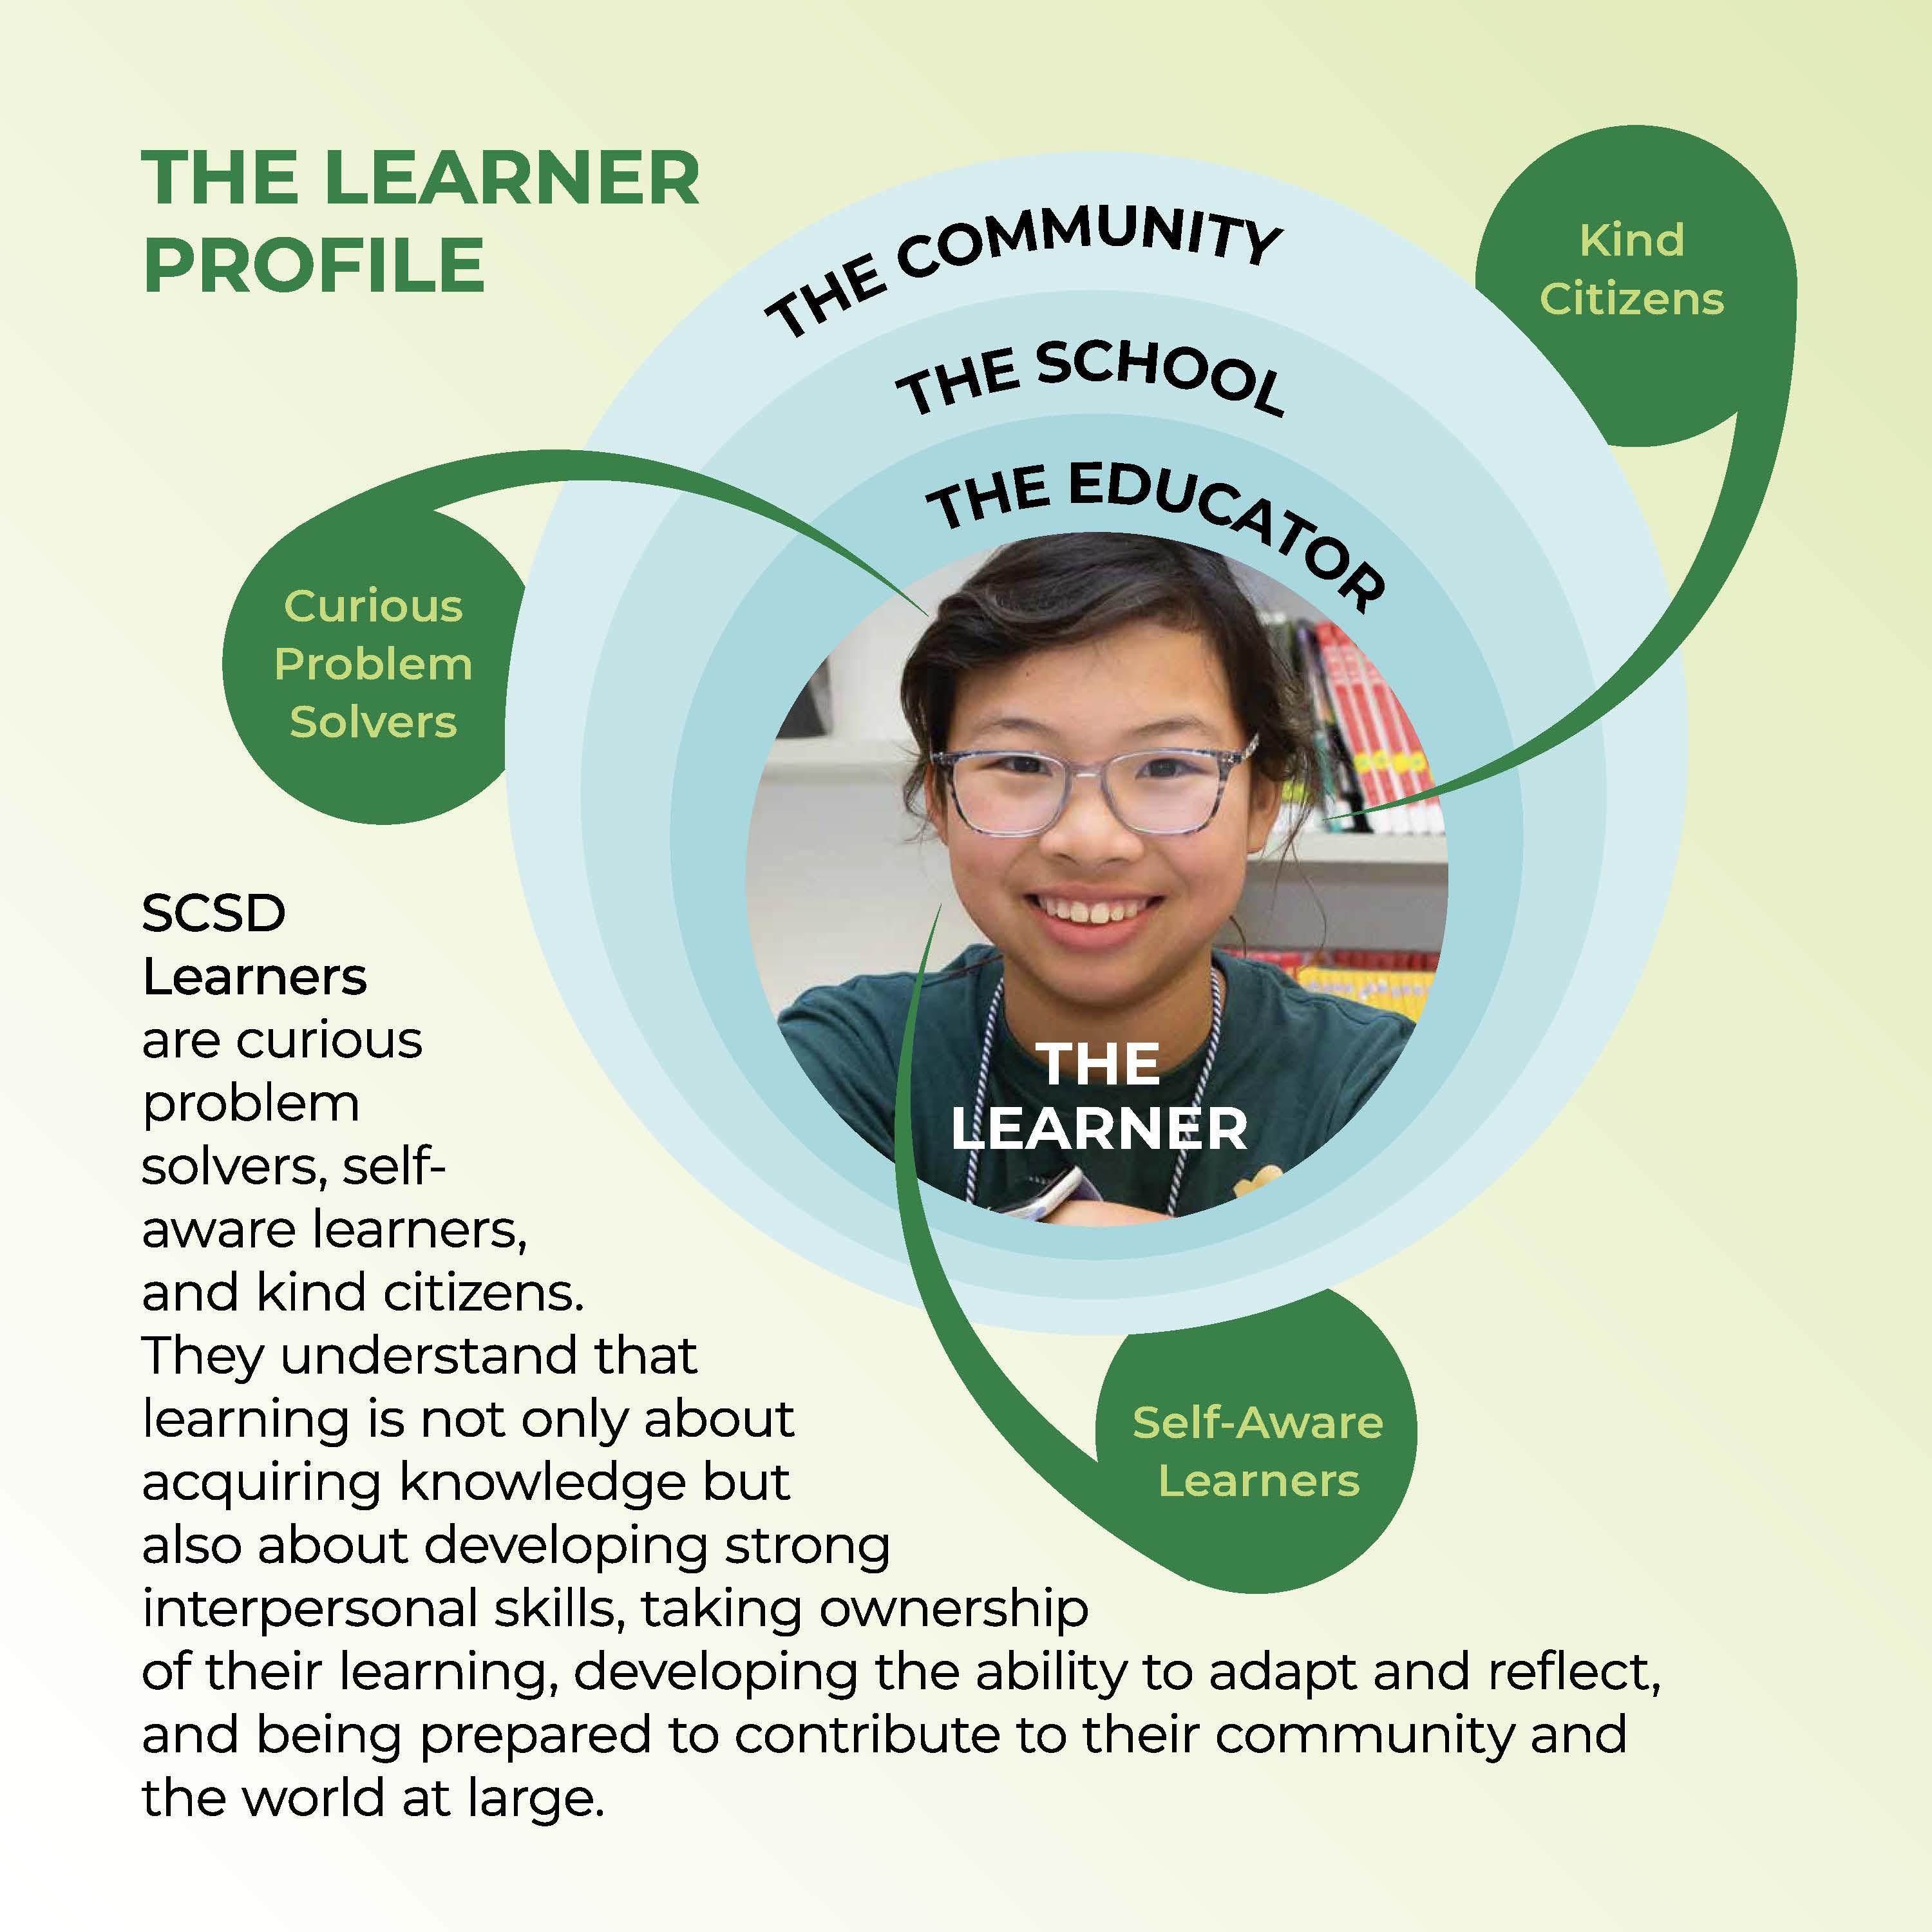 Profile of a Learner Image